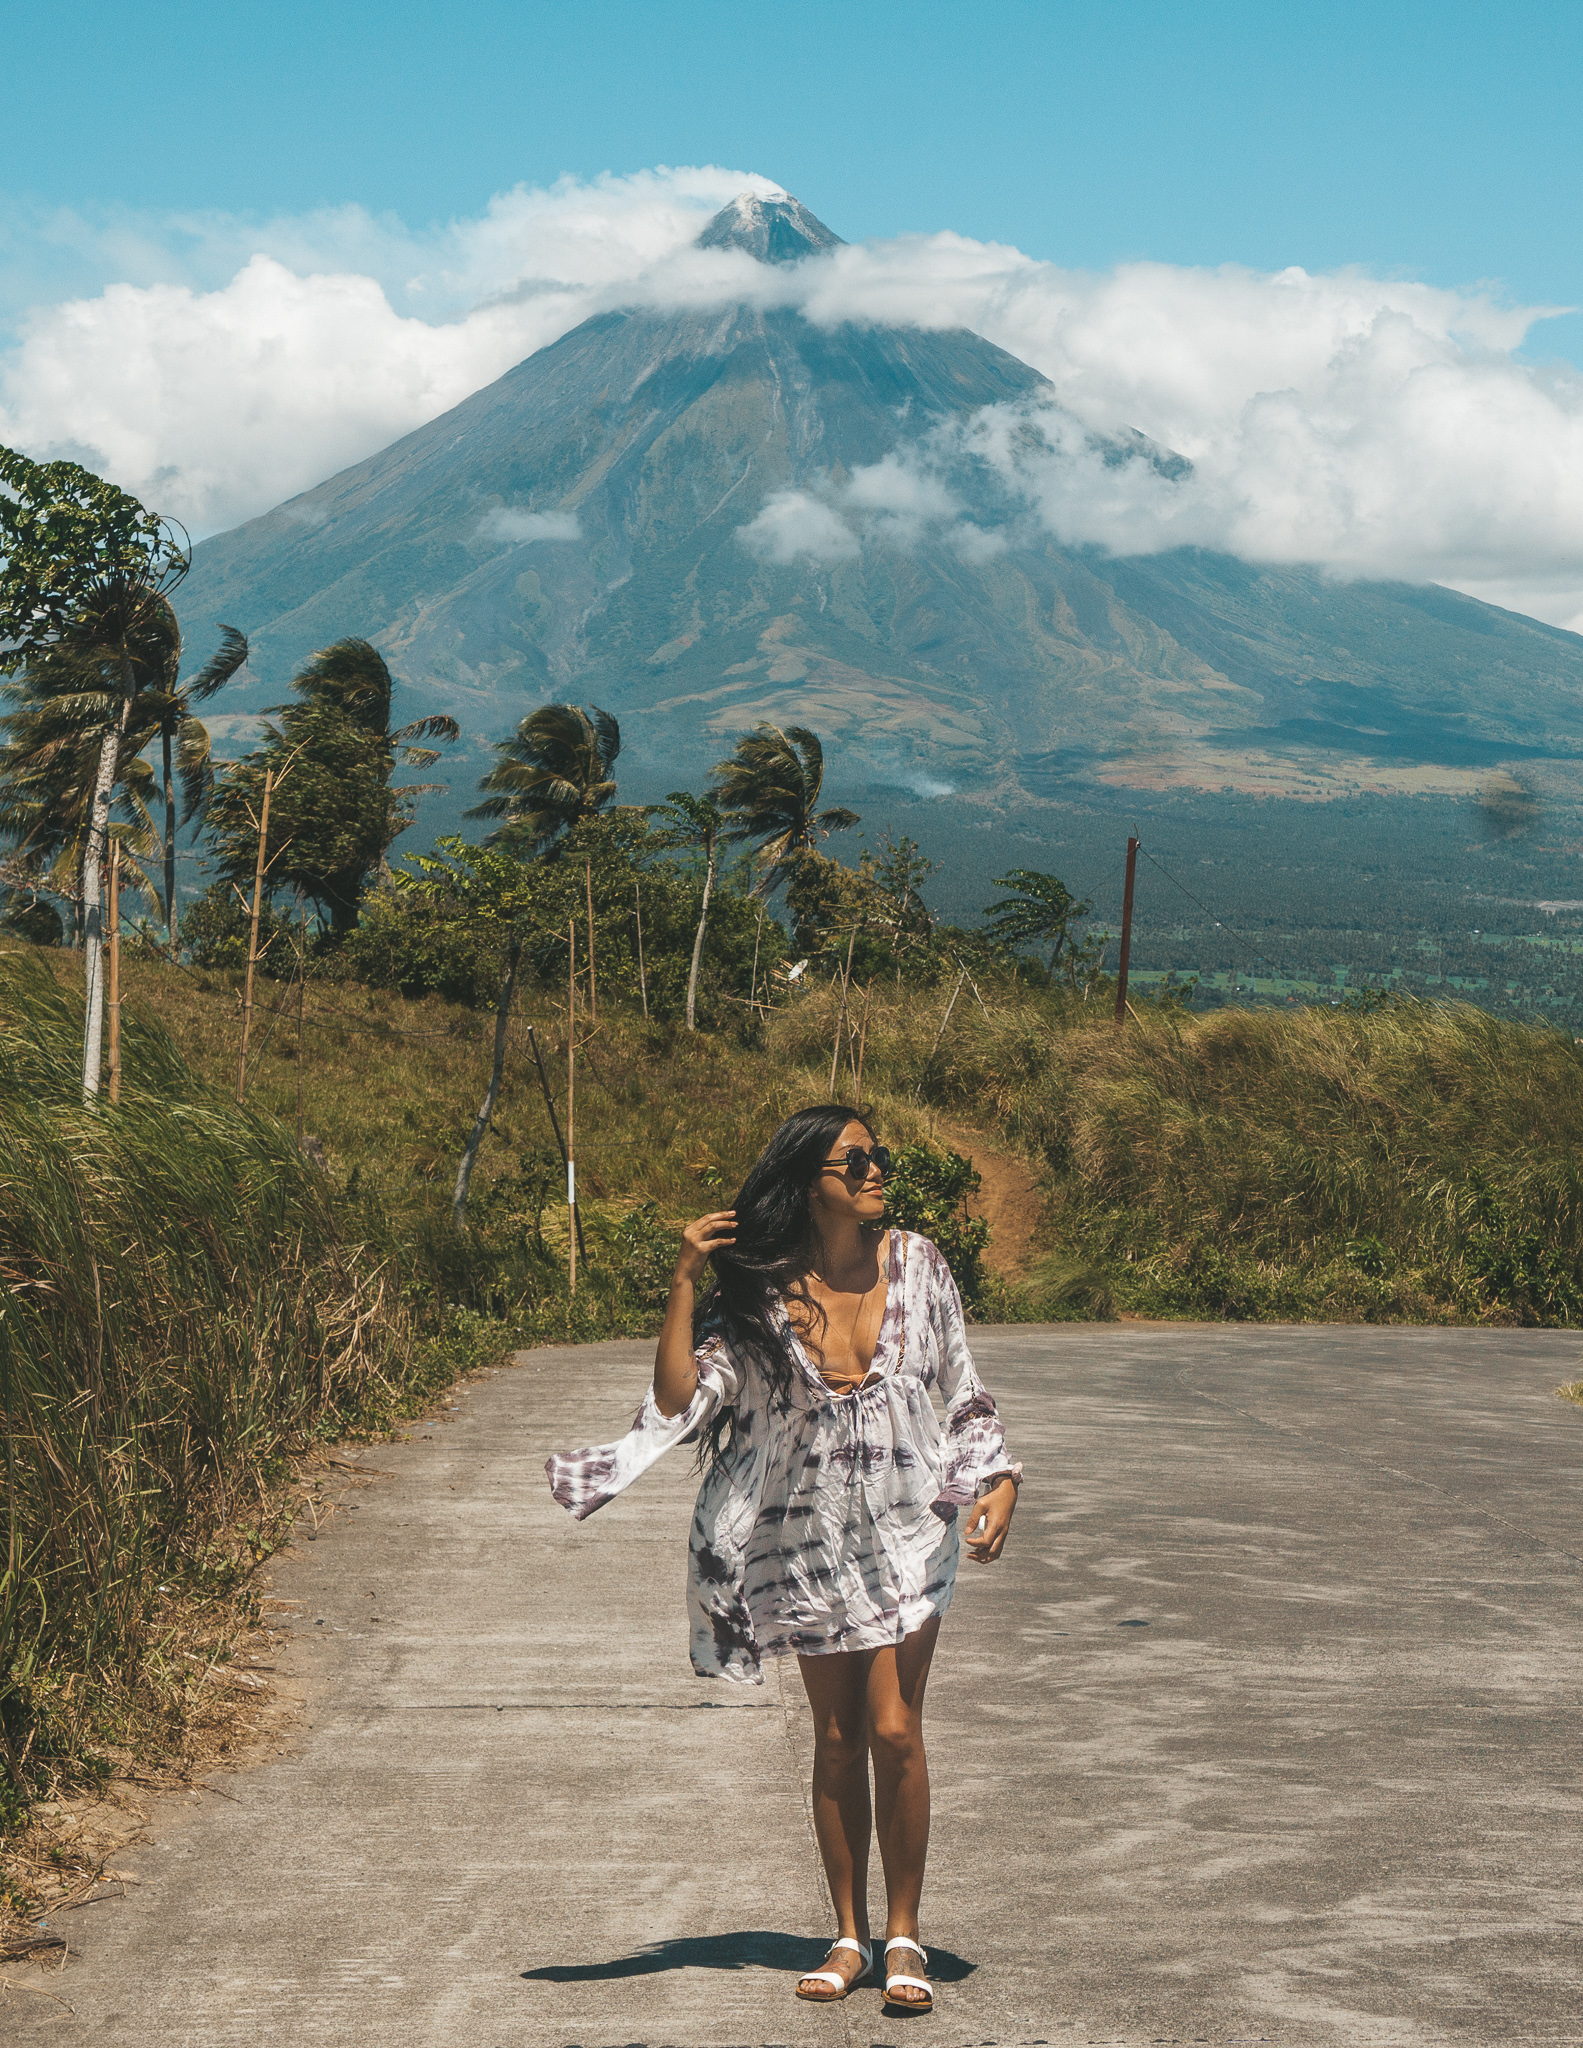 a girl standing in front of mount mayon a very active volcano near legazpi in the albay province of the philipines